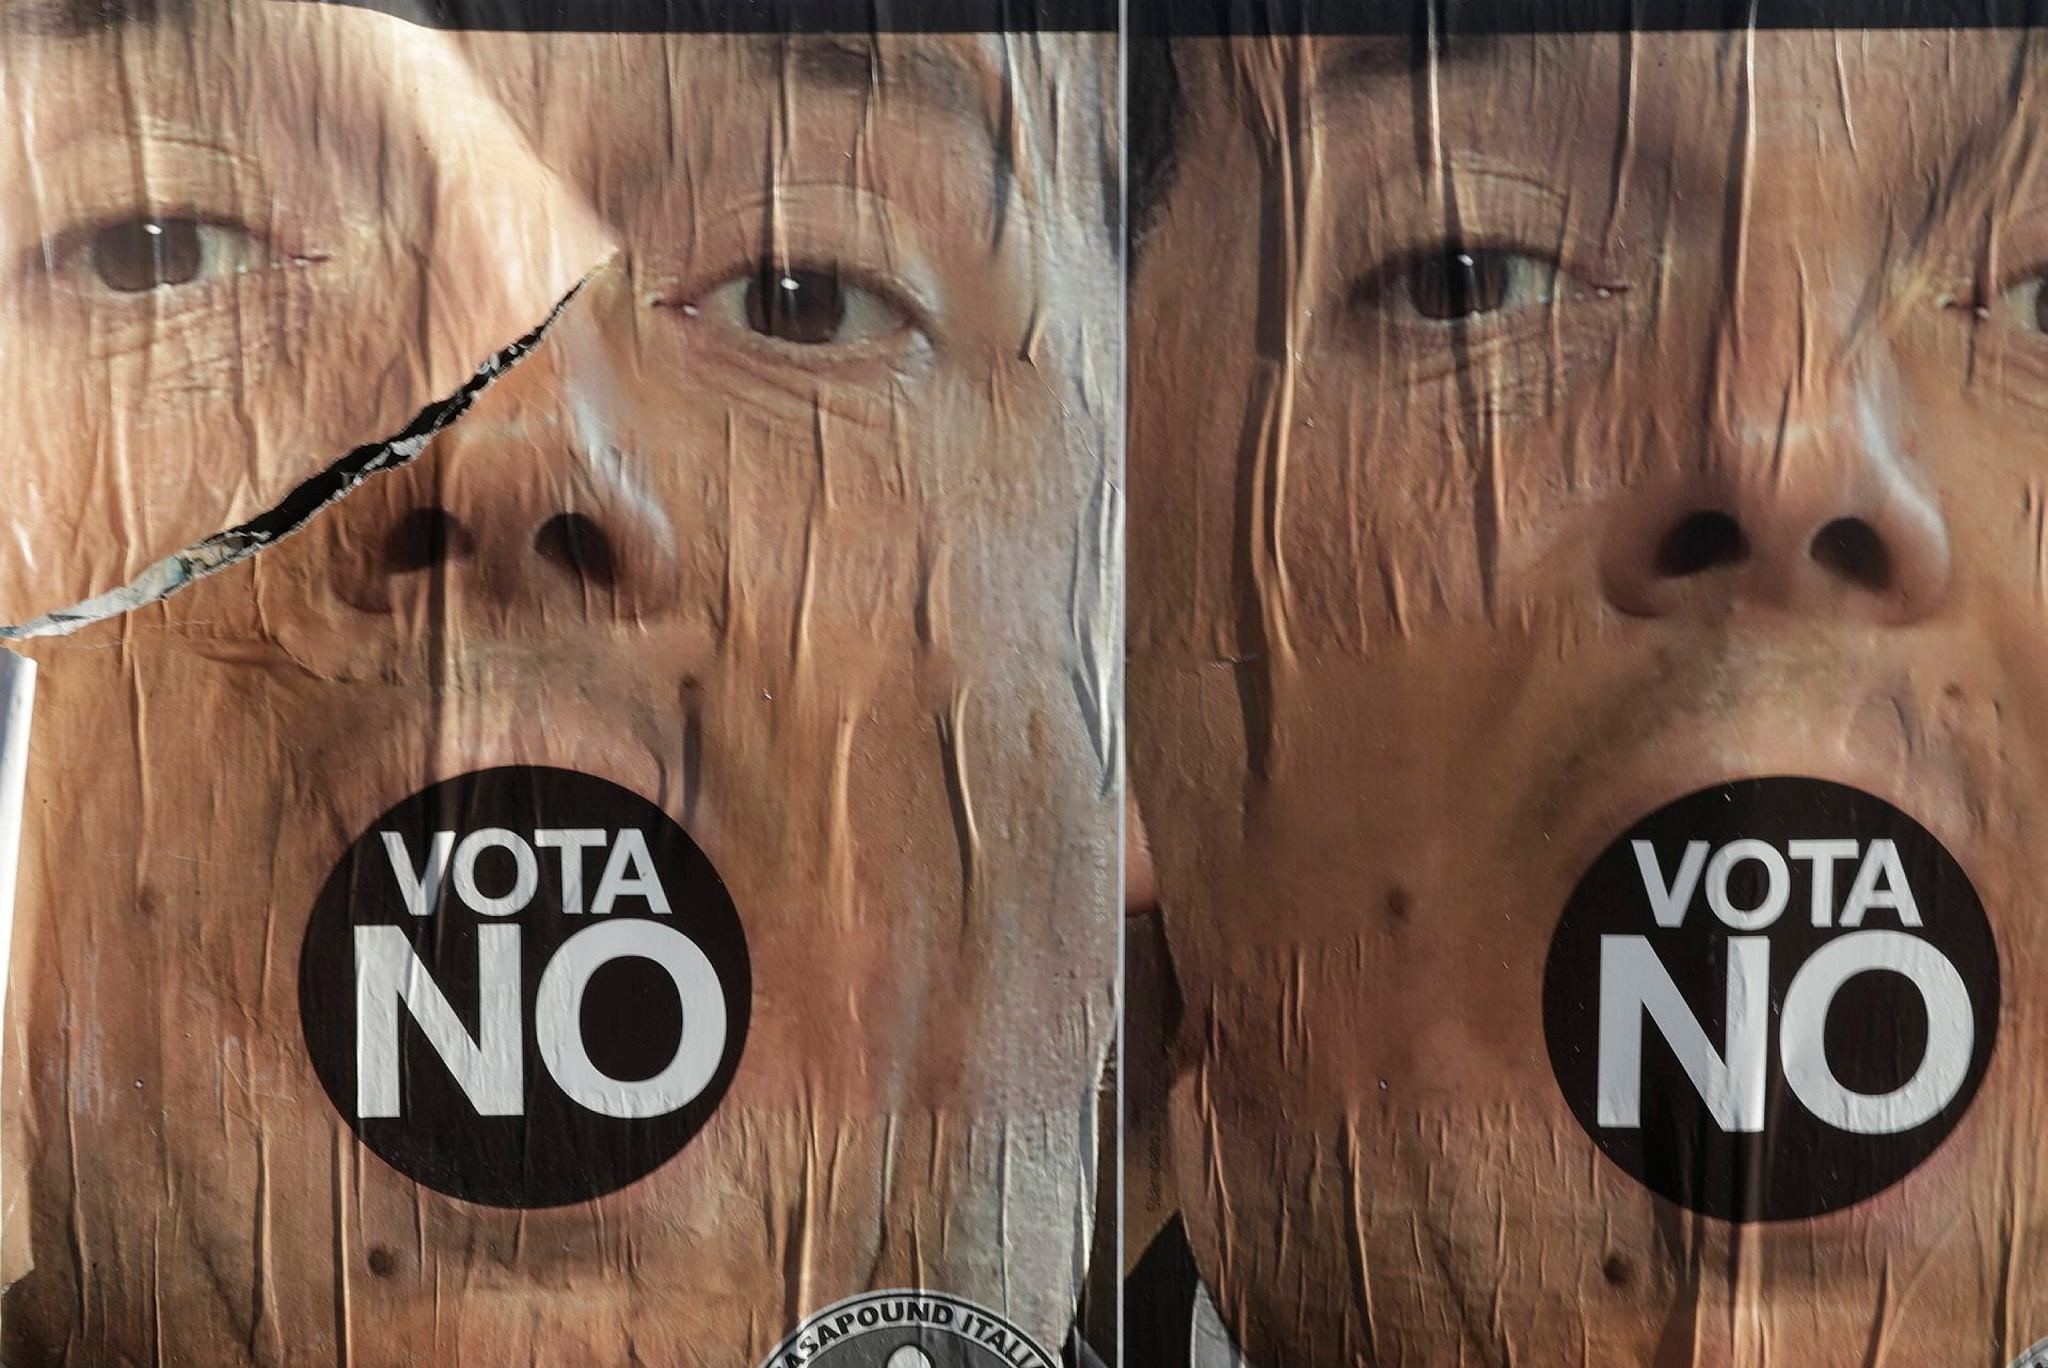 Anti-referendum posters showing Premier Matteo Renzi are seen in Rome a day after the referendum vote, Monday, Dec. 5, 2016. (AP Photo)